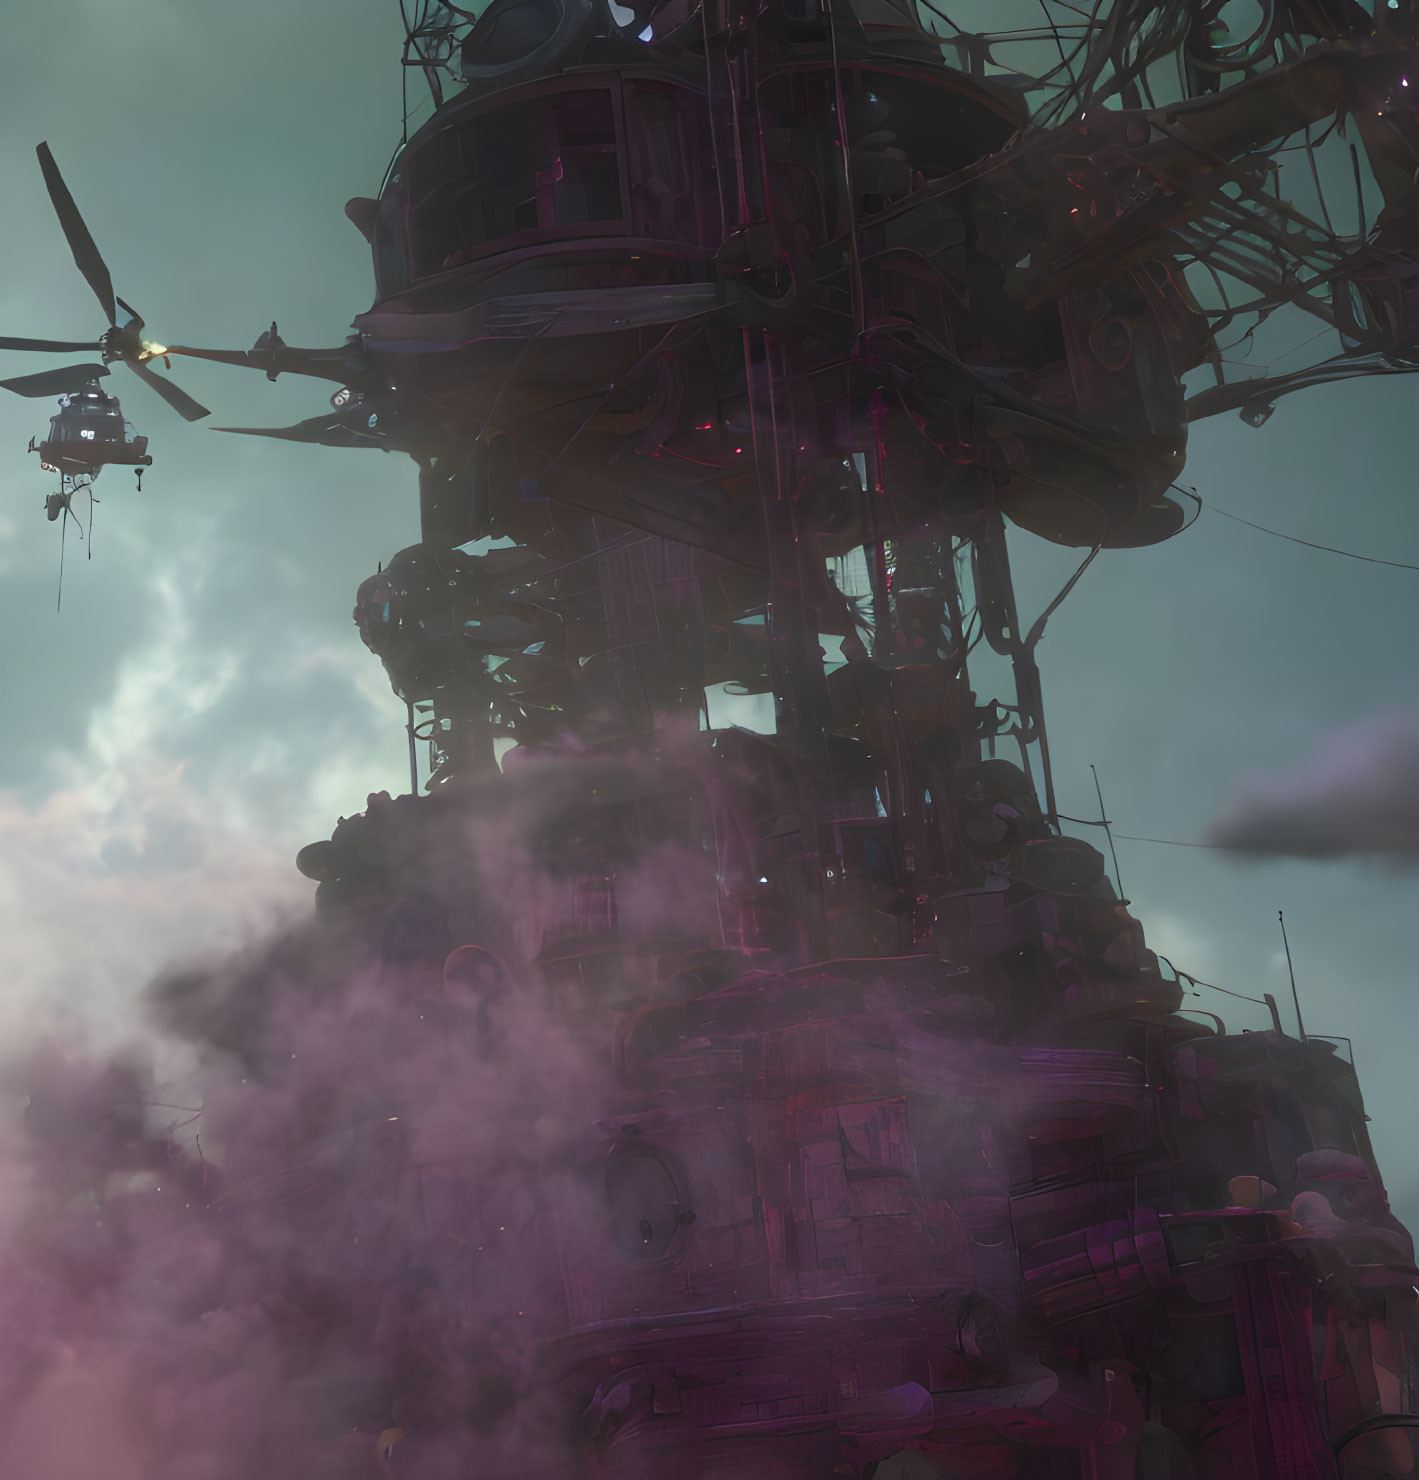 Futuristic purple-lit tower with helicopter in cloudy sky